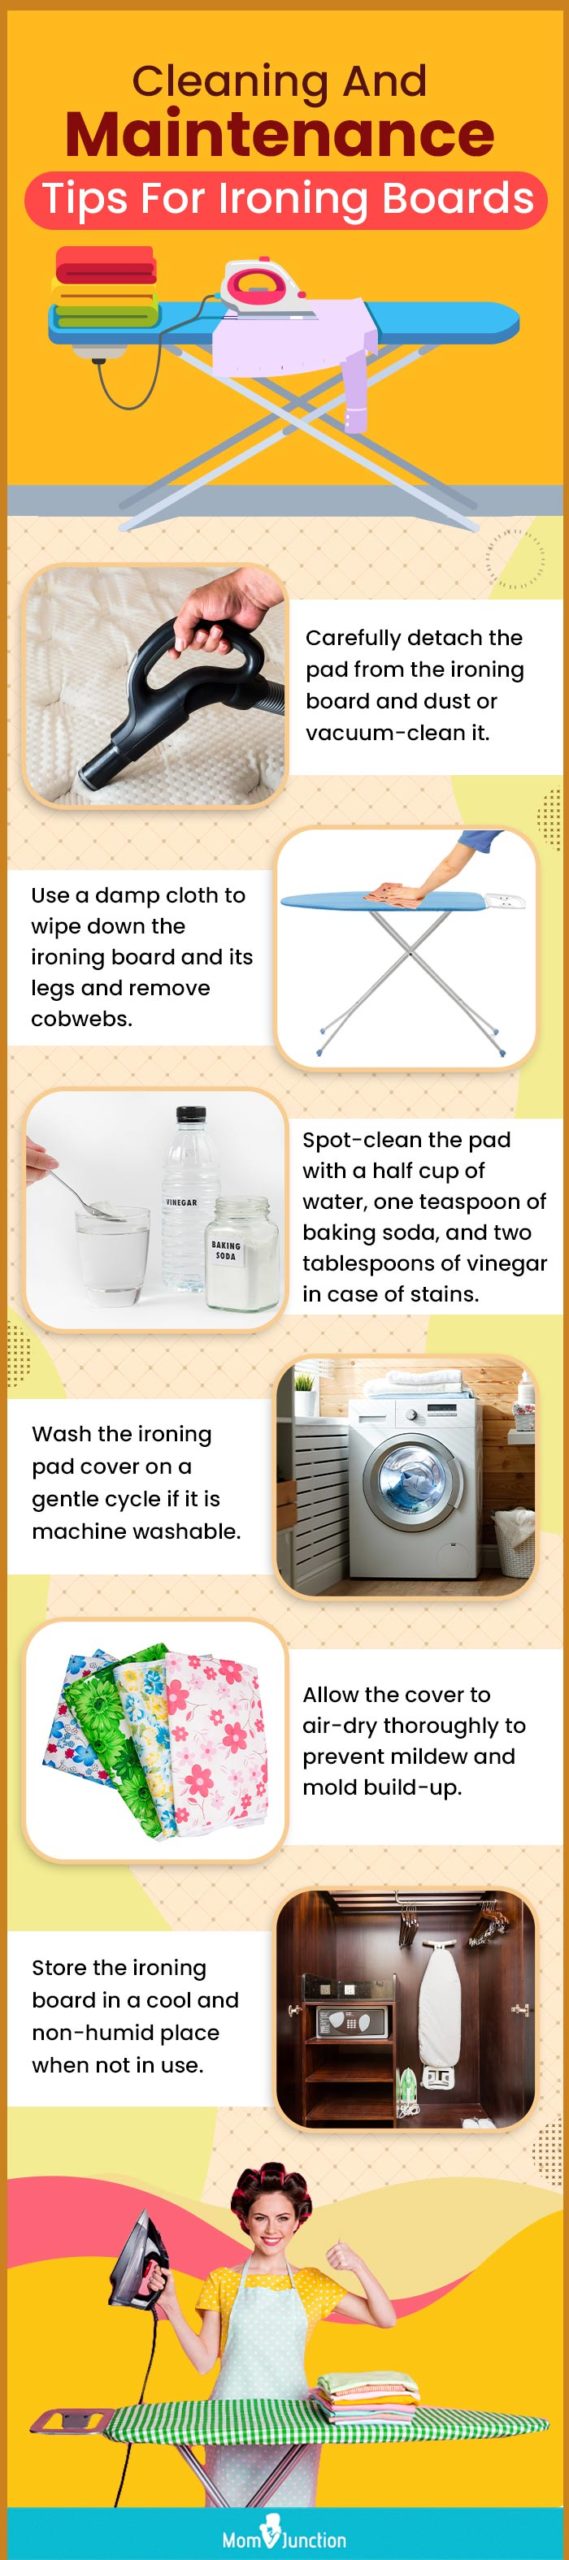 Cleaning-And-Maintenance-Tips-For-Ironing-Boards (infographic)